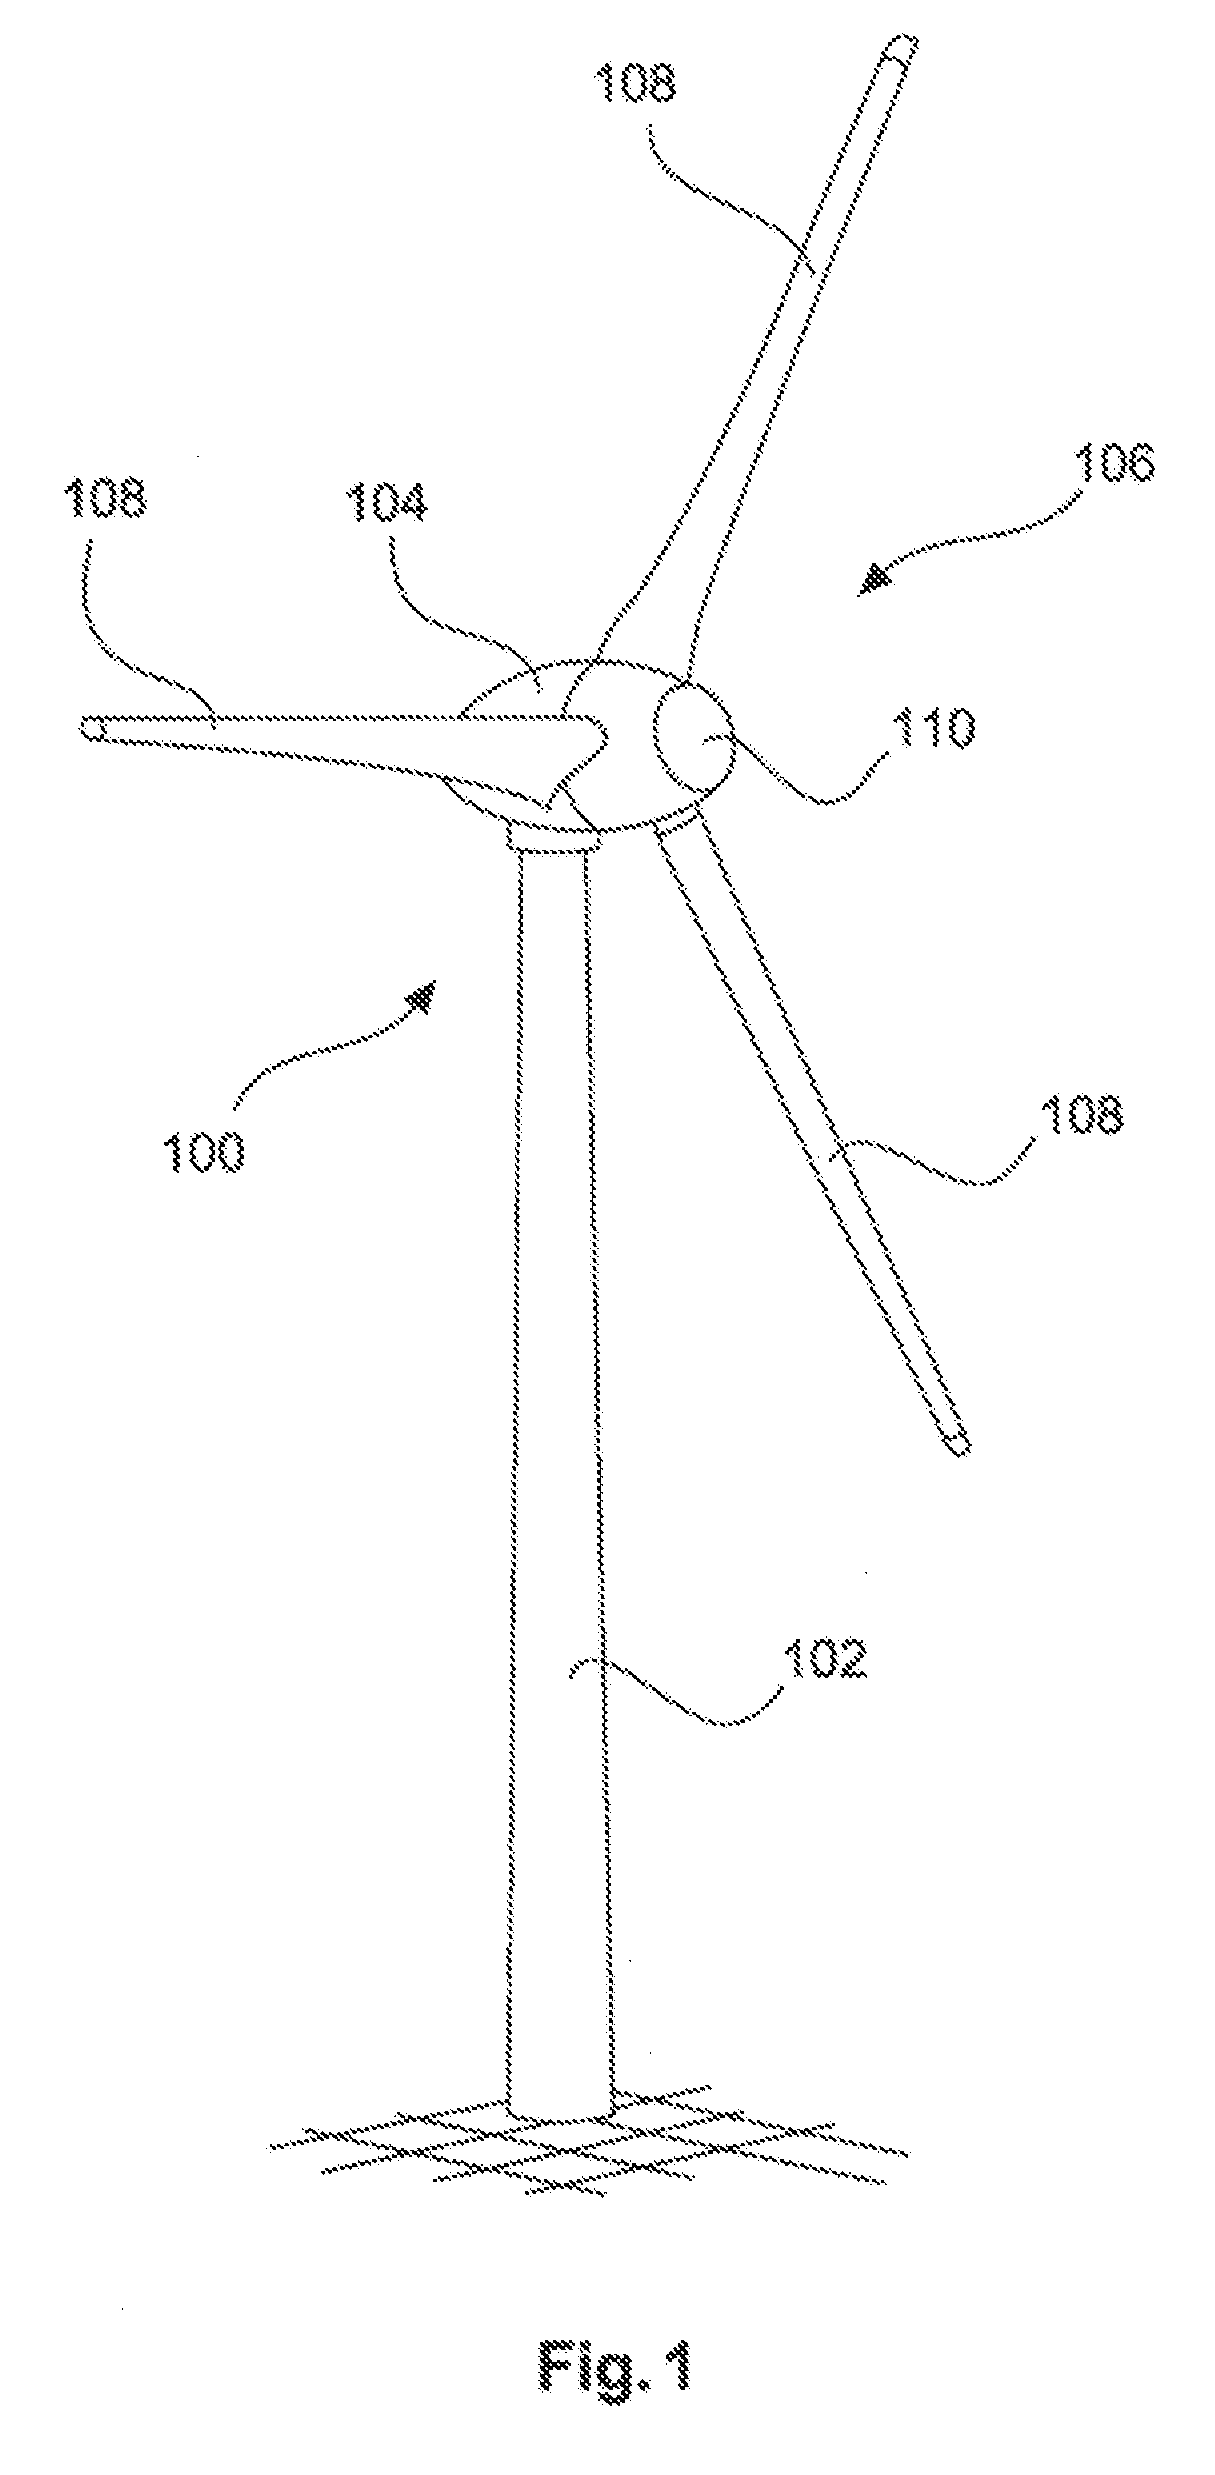 Method for generating an alternating electric current